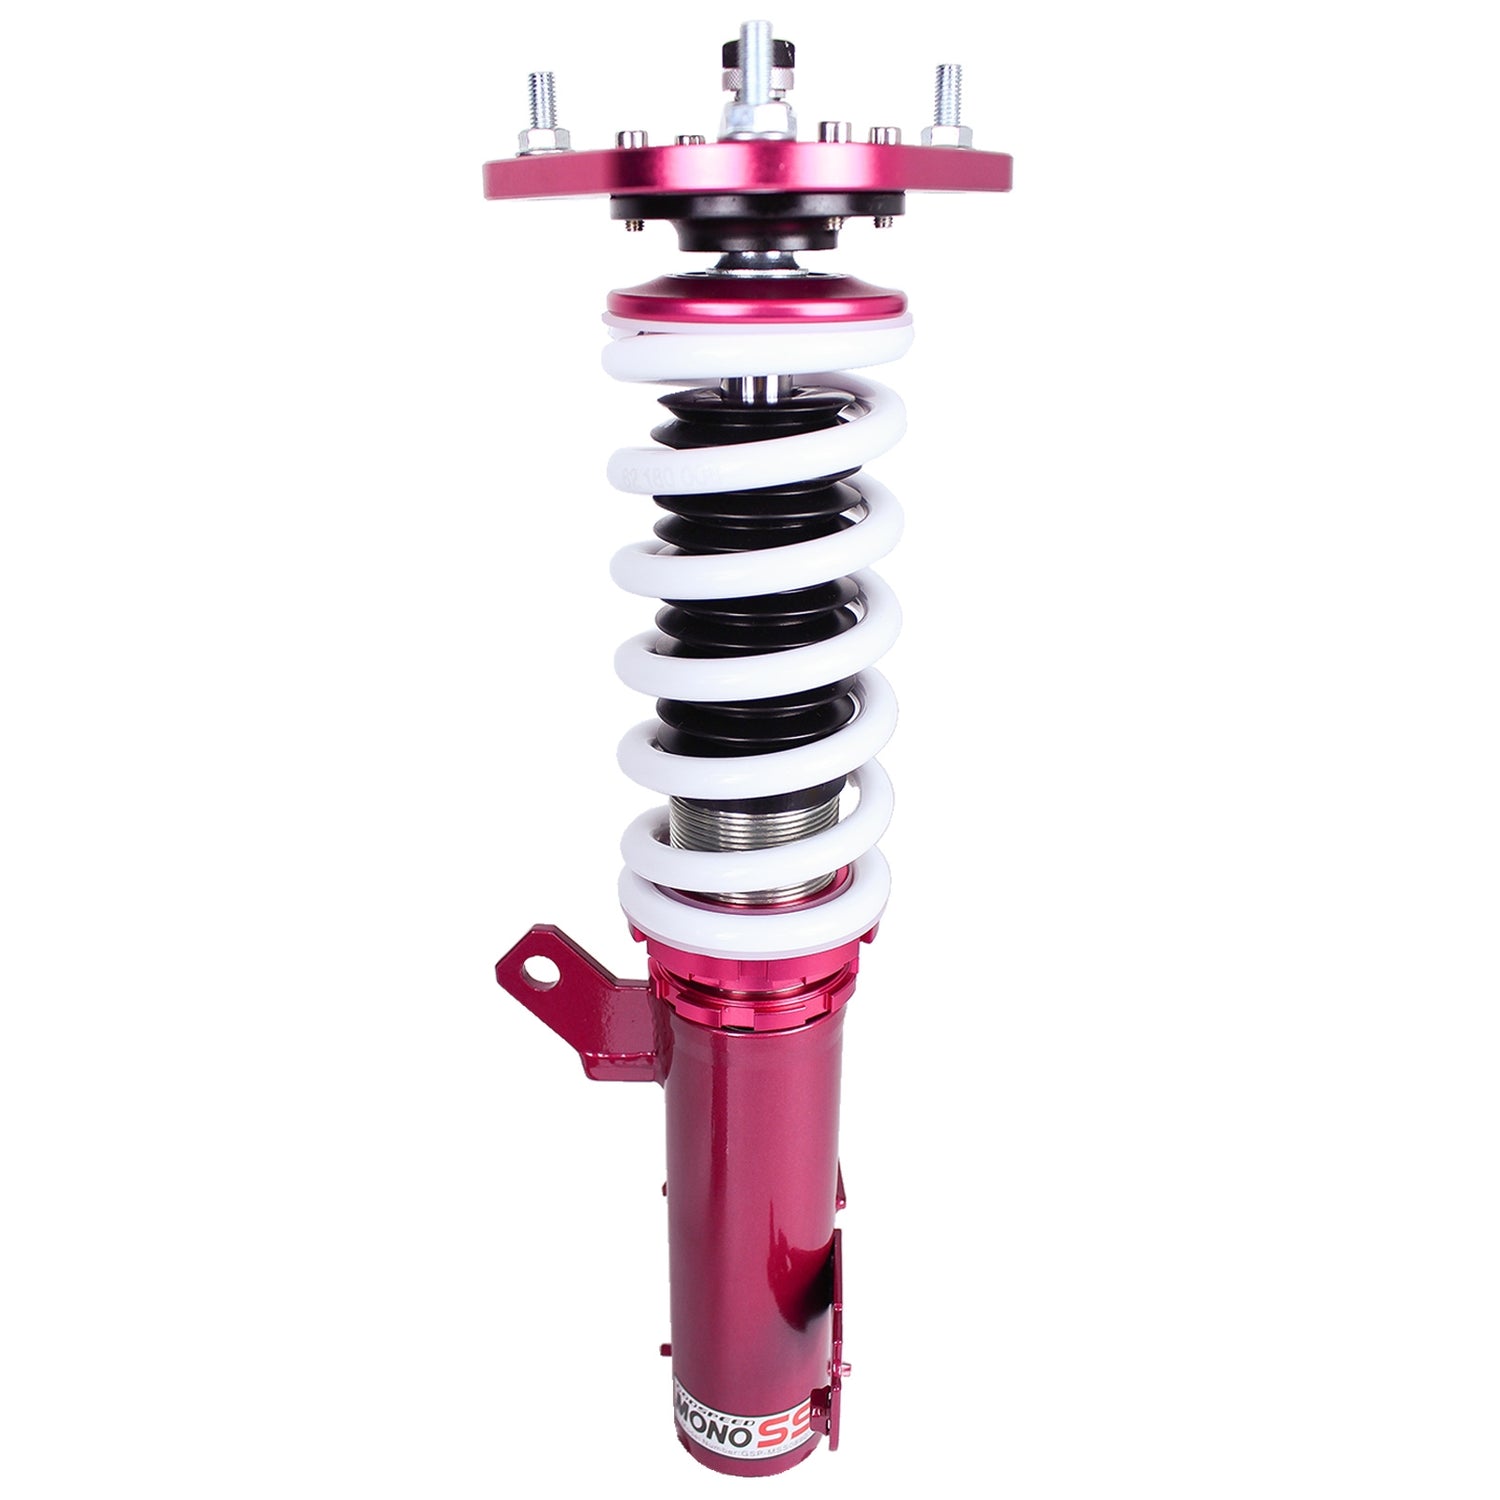 Godspeed MSS0890-C MonoSS Coilover Lowering Kit, Fully Adjustable, Ride Height, Spring Tension And 16 Click Damping, Toyota Corolla(E140/E150) 2009-13